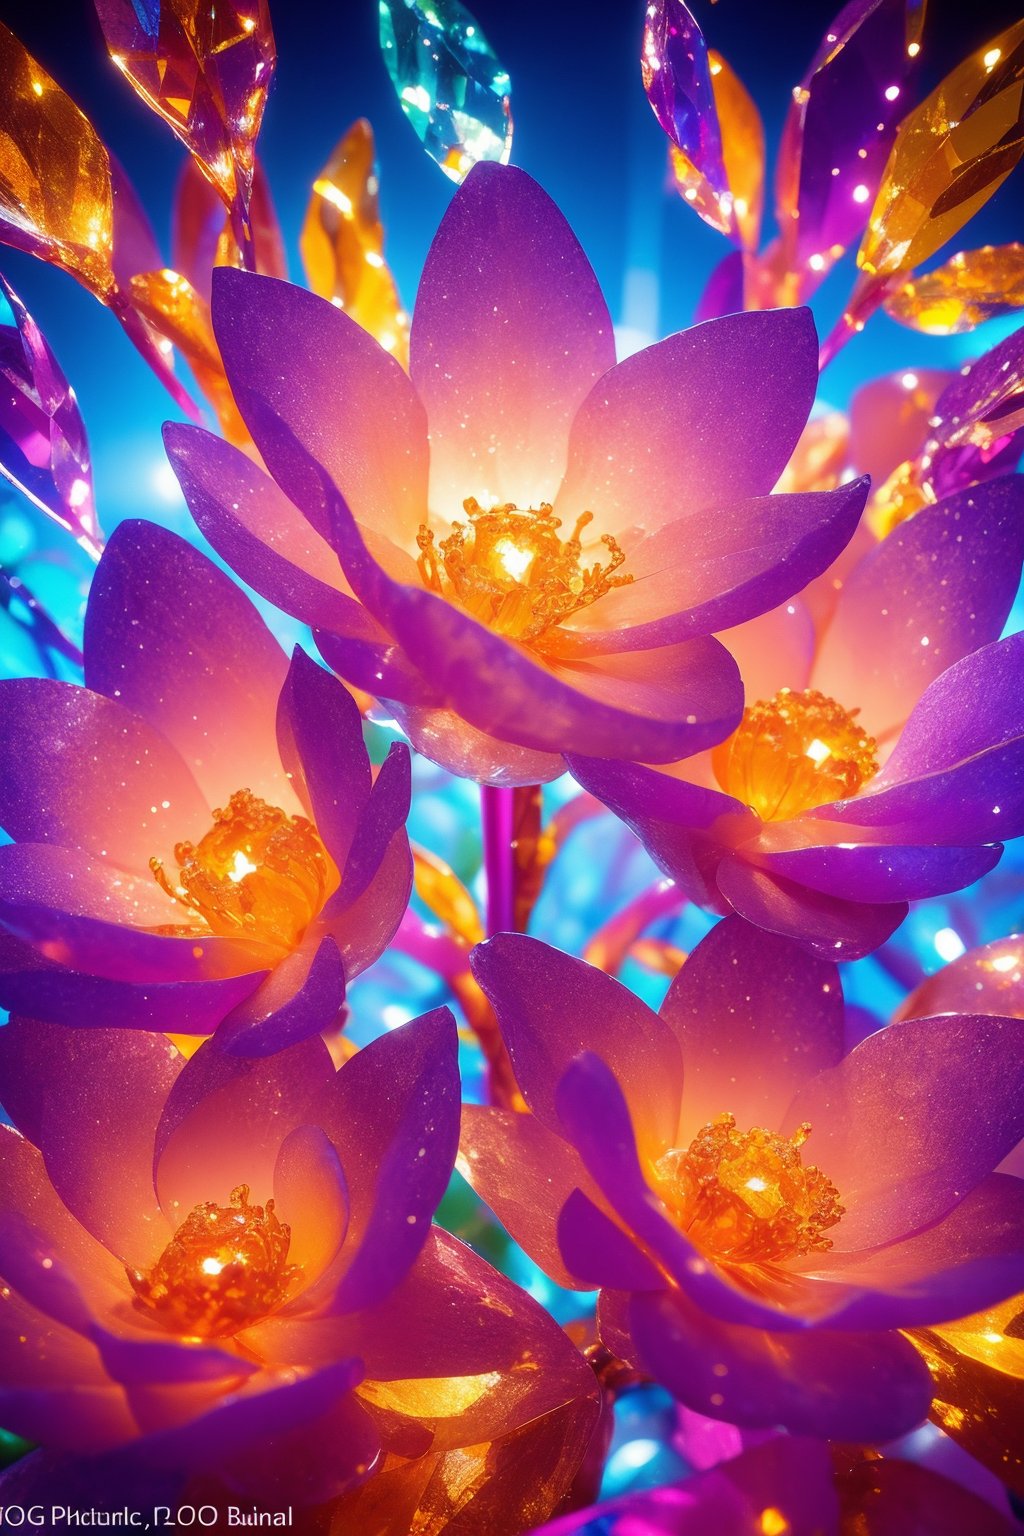 (((photographic, photo, photogenic))), extremely high quality high detail RAW color photo, crystal flower, intricate crystal patterns, translucent petals, prismatic light refraction, sharp, precise edges, detailed textures, luminous glow, 